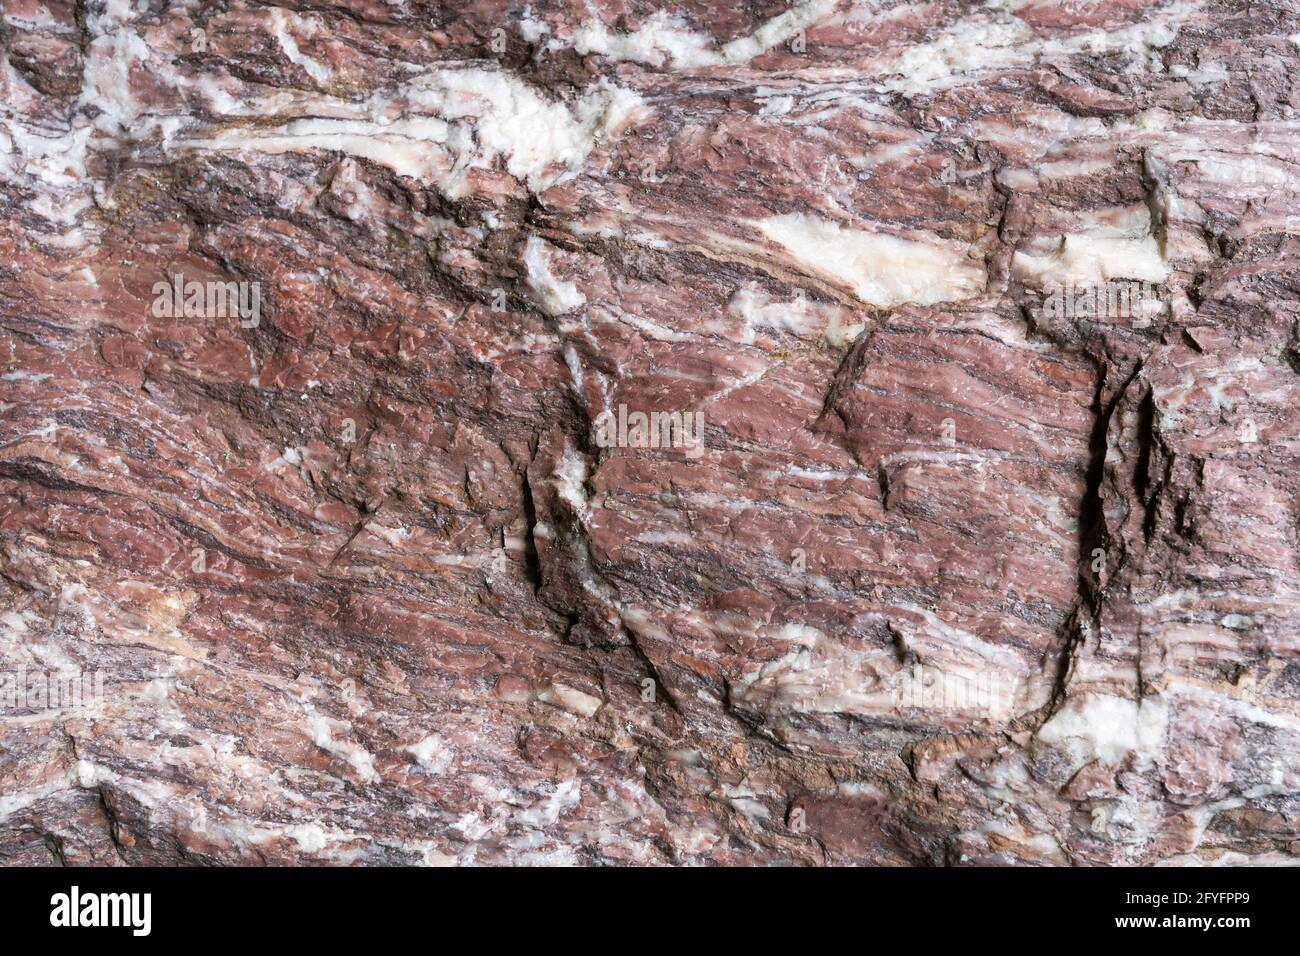 Red white natural stone with rough surface in close-up Stock Photo